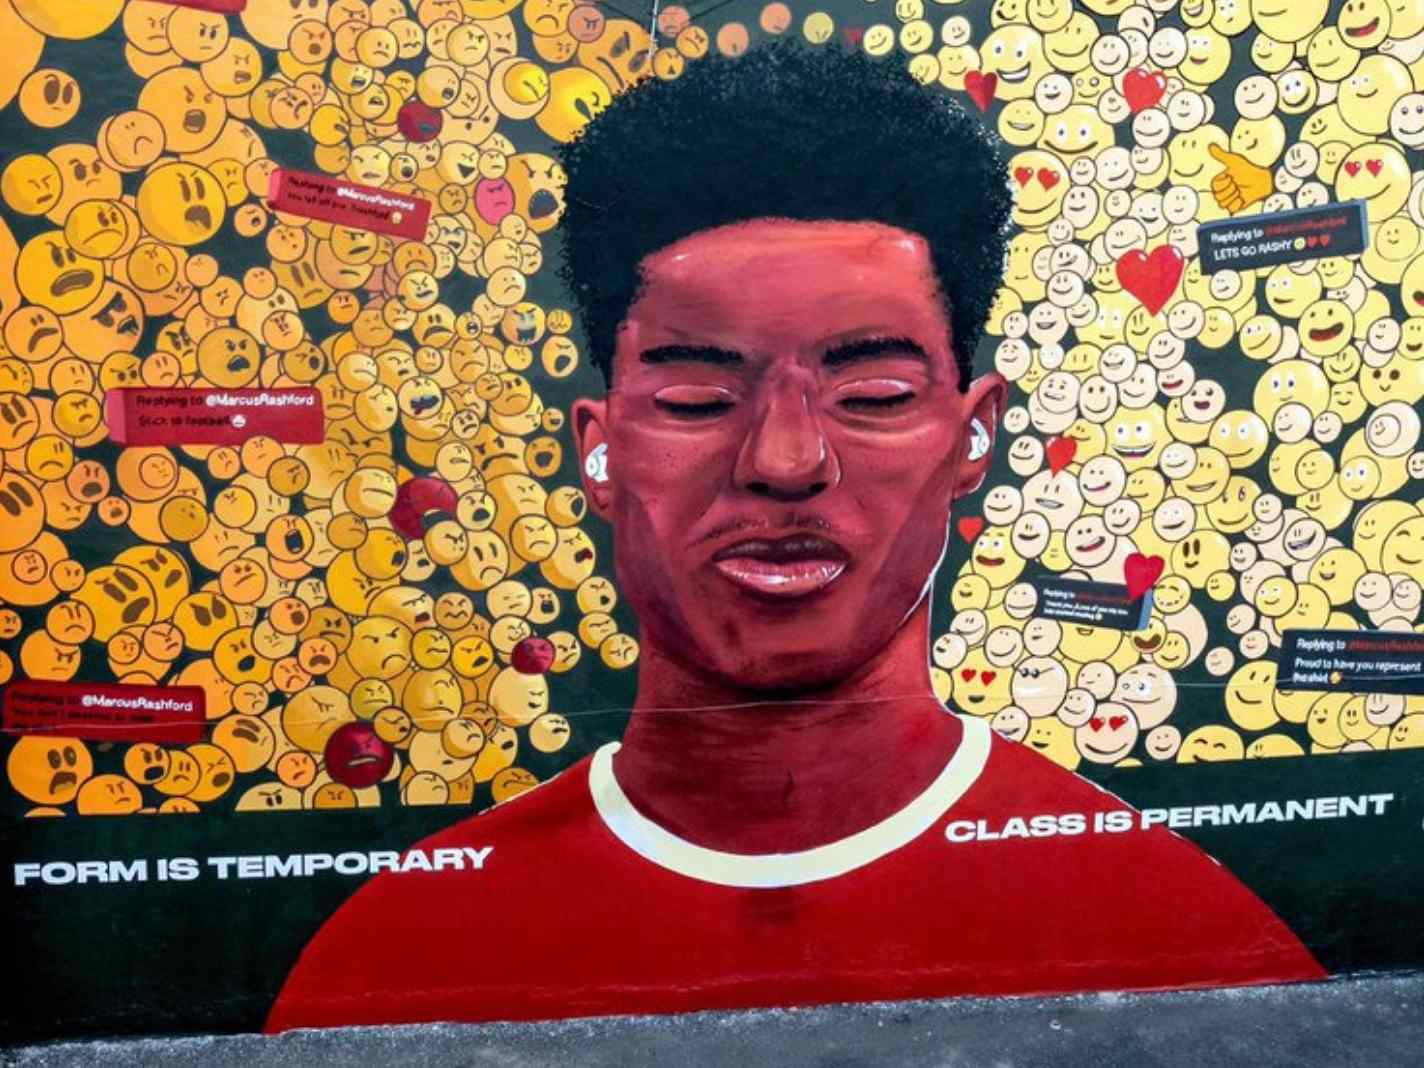 Man United fans have mixed feelings about new emoji-packed Marcus Rashford mural